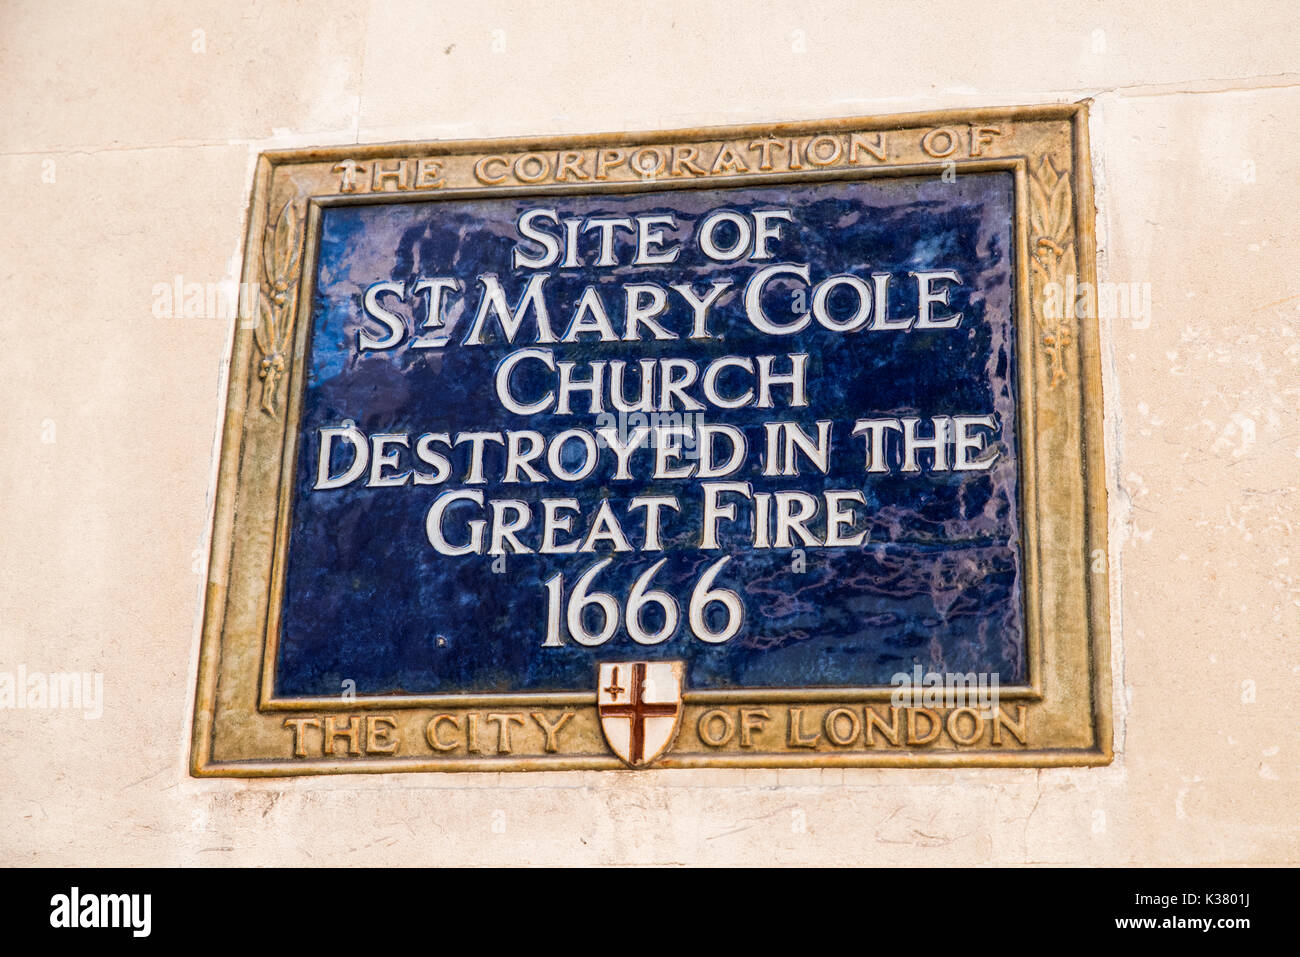 LONDON, UK - AUGUST 25TH 2017: A blue plaque marking the location where St. Mary Cole Church once stood in London, on 25th August 2017. Stock Photo